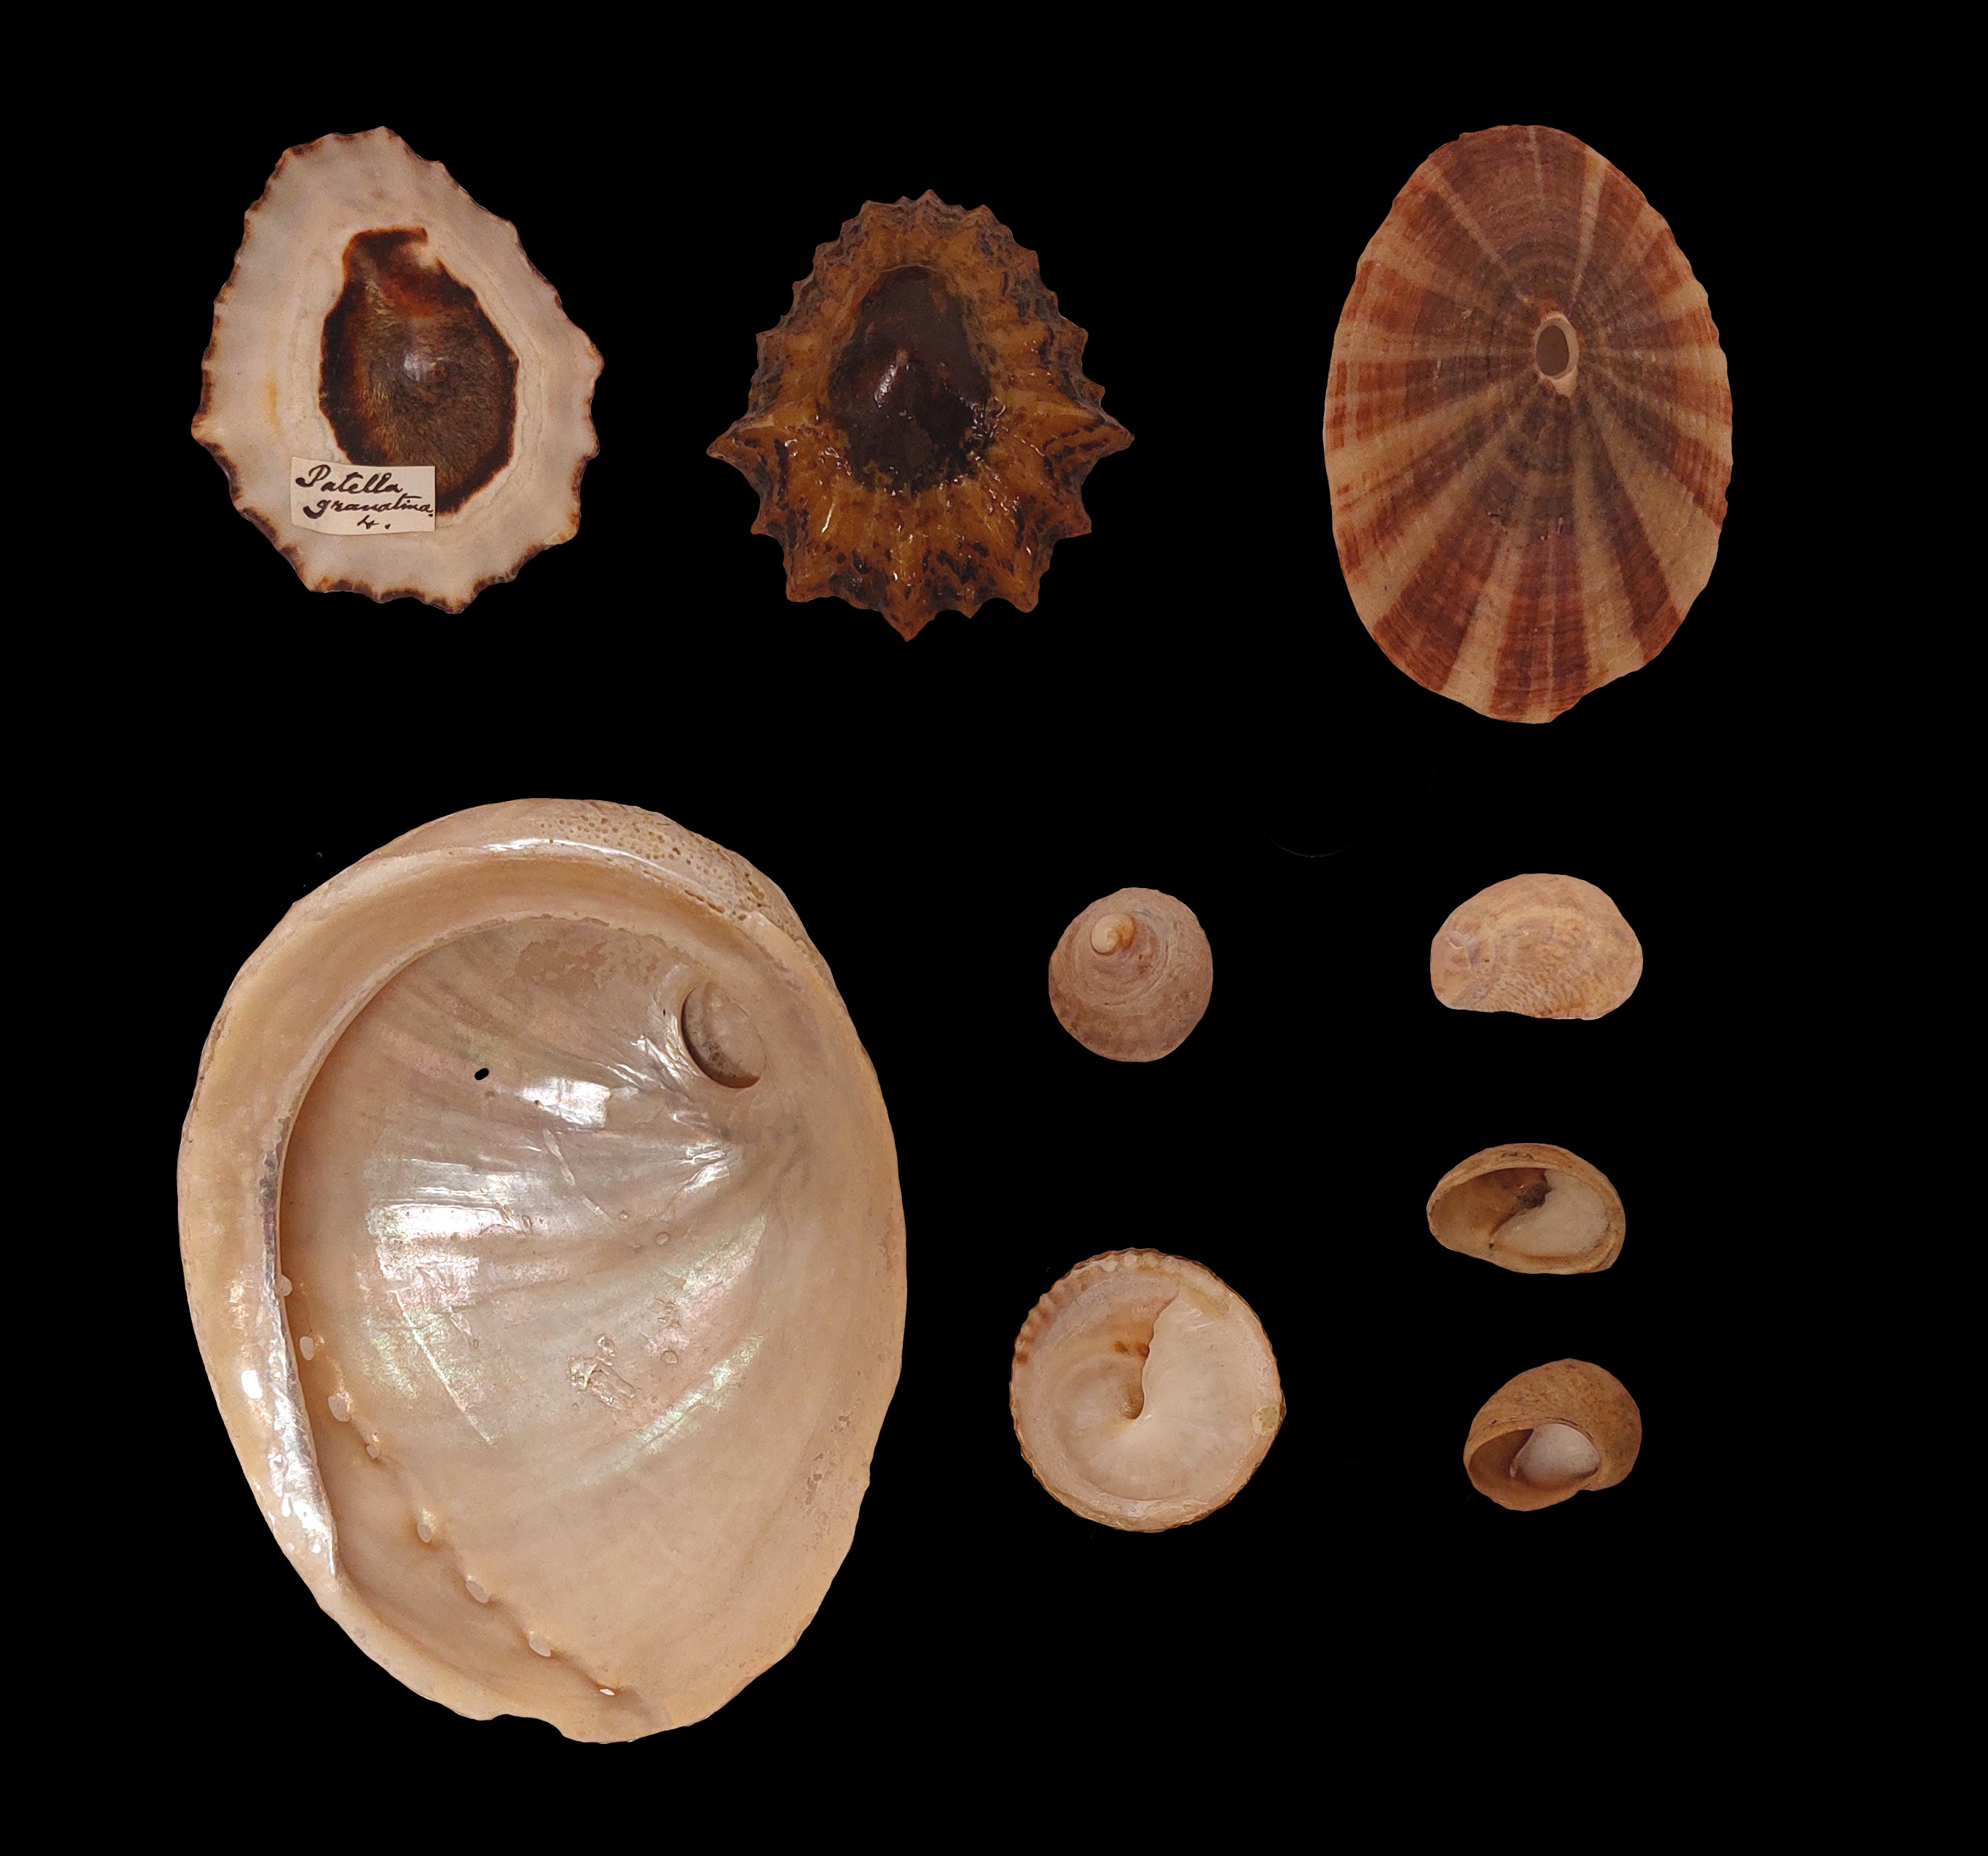 An image of some limpets including Fissurella, Calyptraea and Crepidula